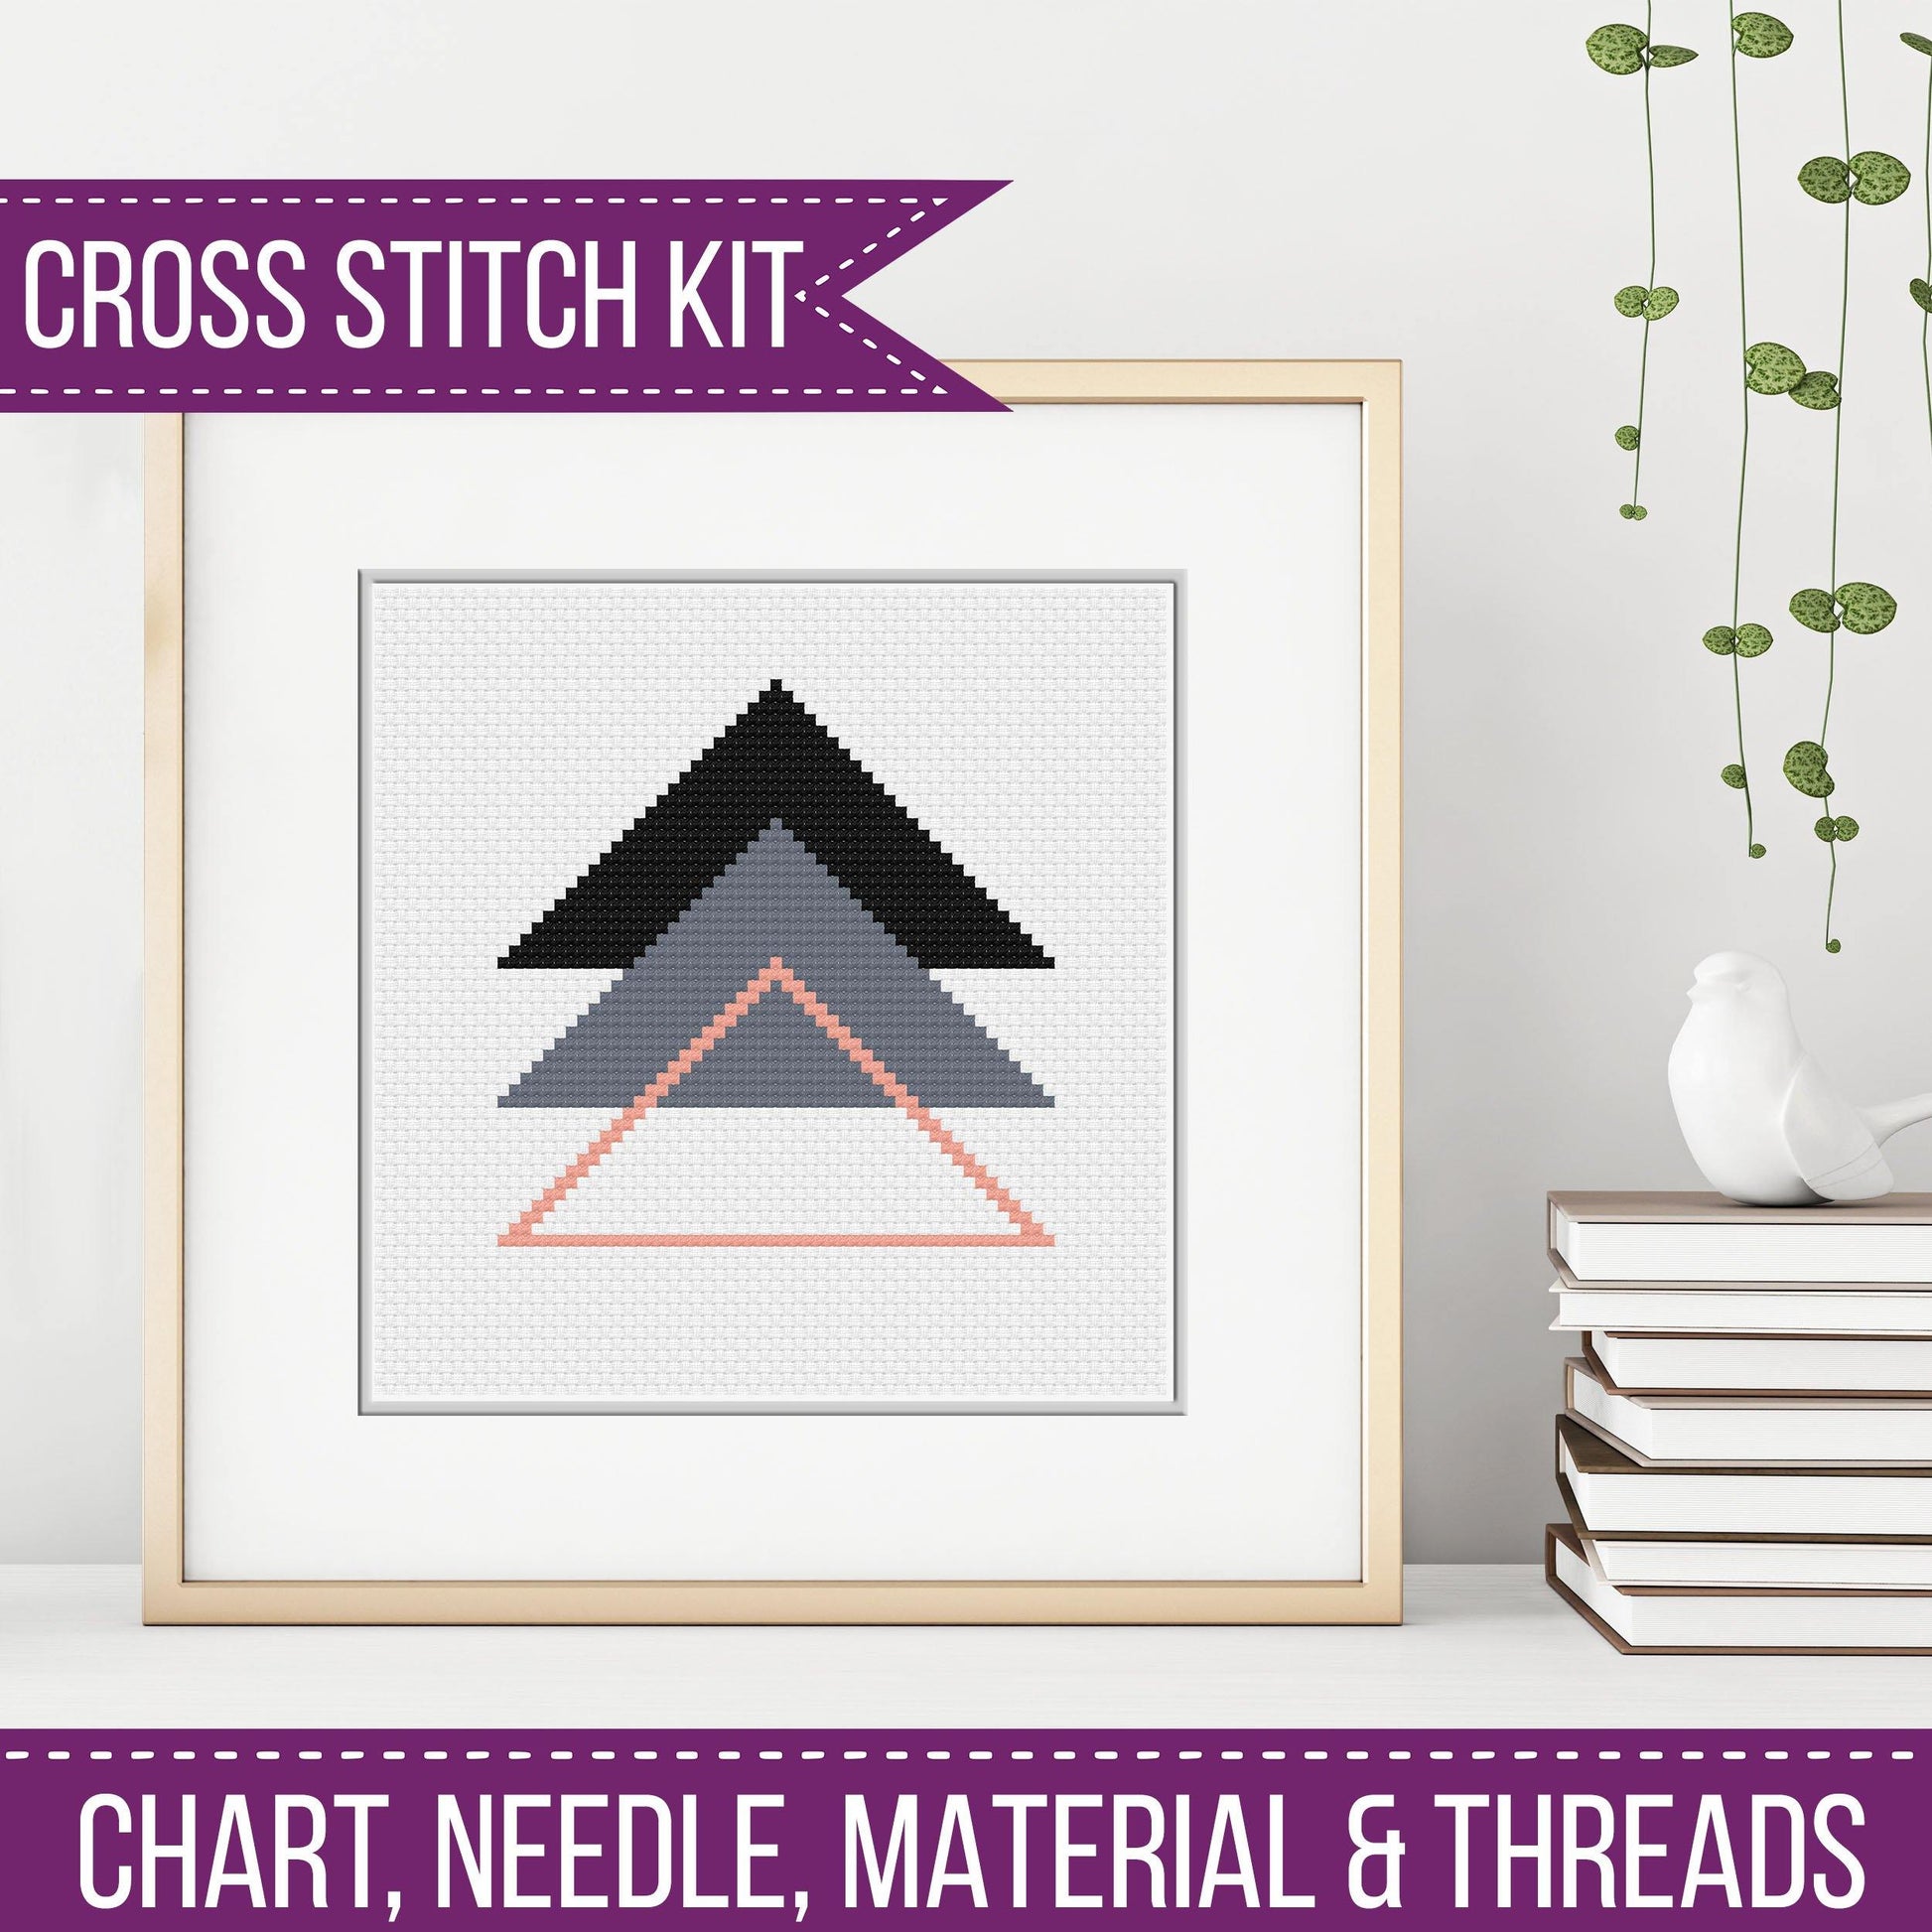 Abstract Triangles Kit - Blackwork Patterns & Cross Stitch by Peppermint Purple